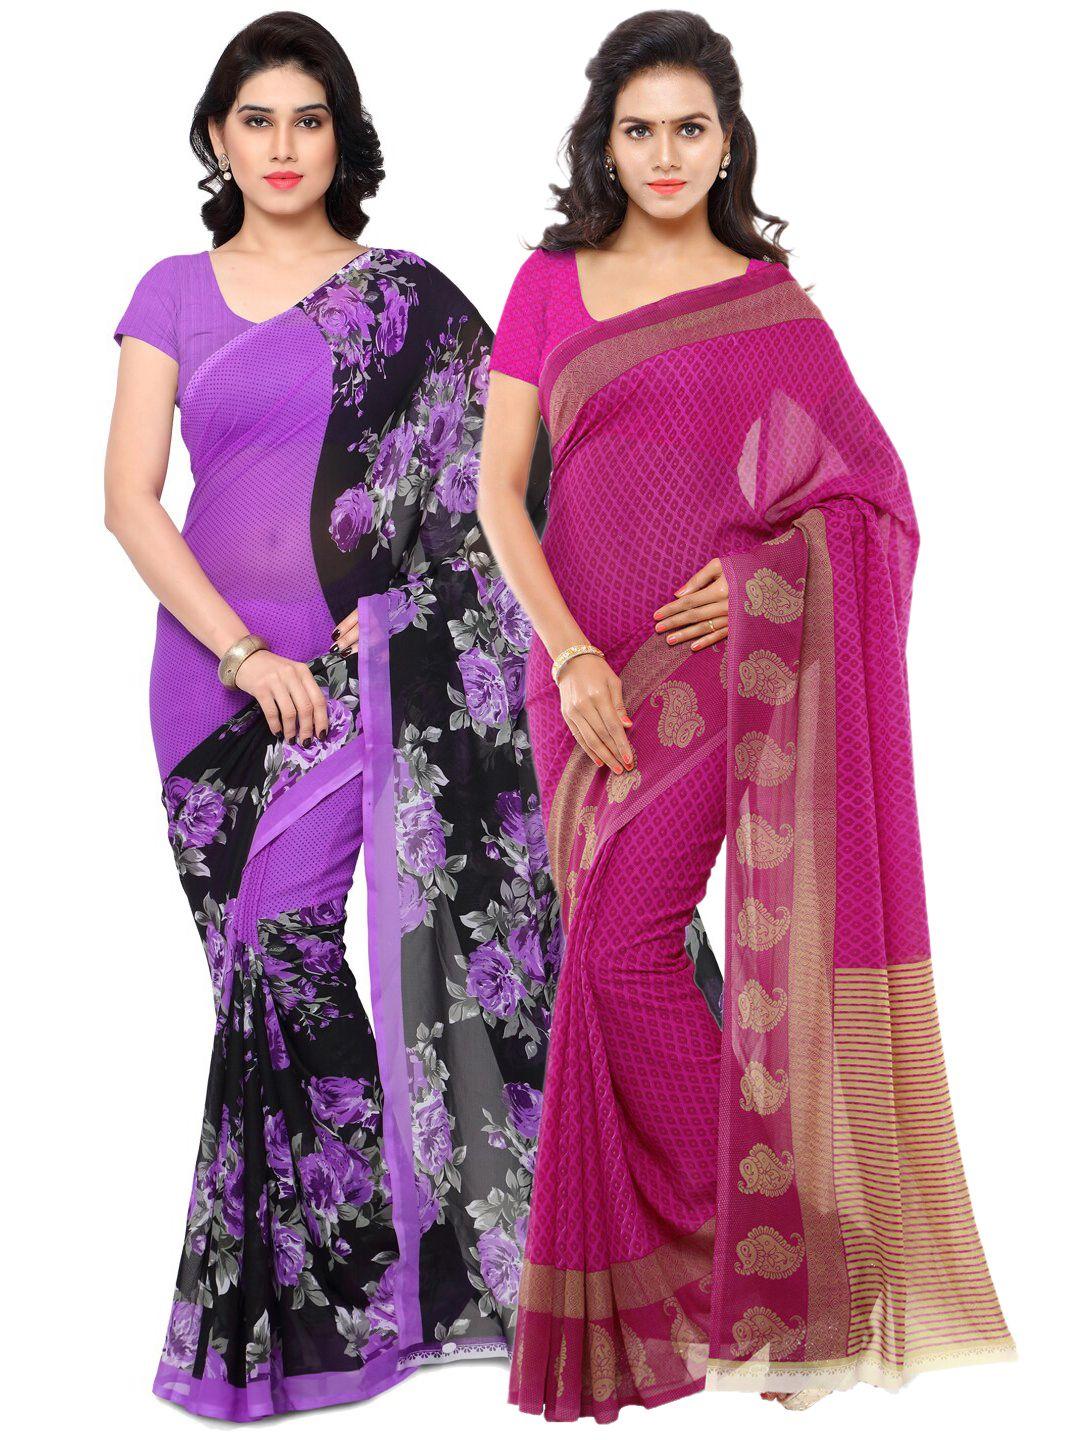 kalini pack of 2 poly georgette sarees